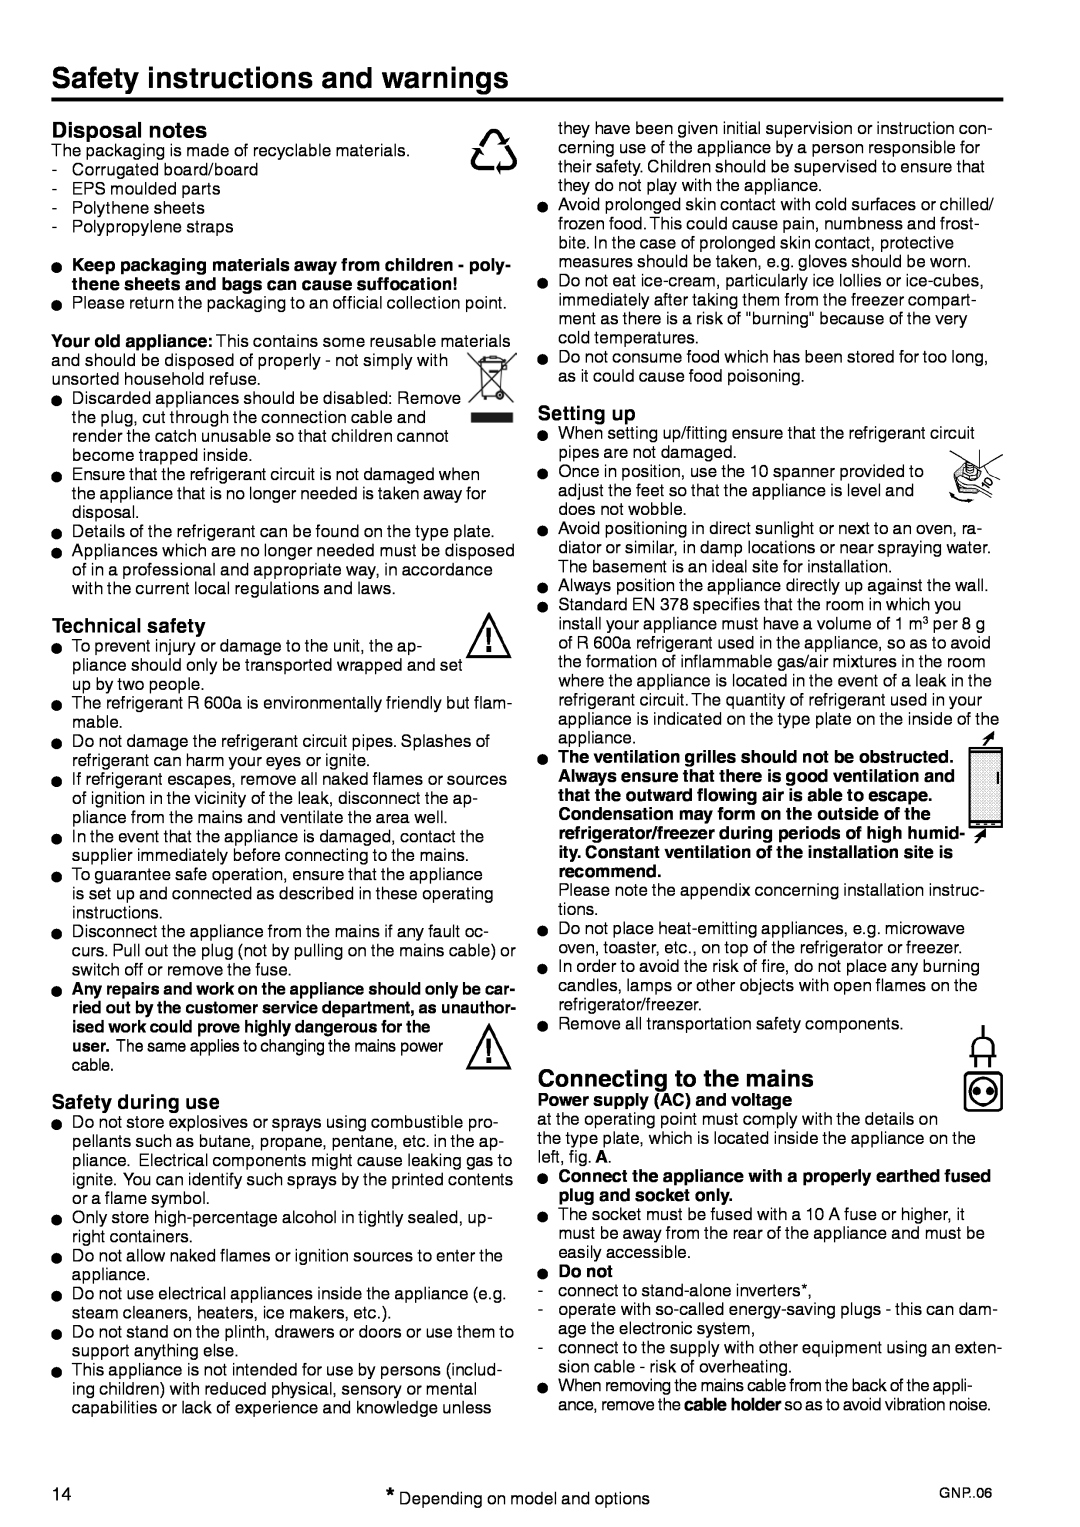 Liebherr 7084 152 - 00 manual Safety instructions and warnings, Connecting to the mains, Disposal notes, Technical safety 